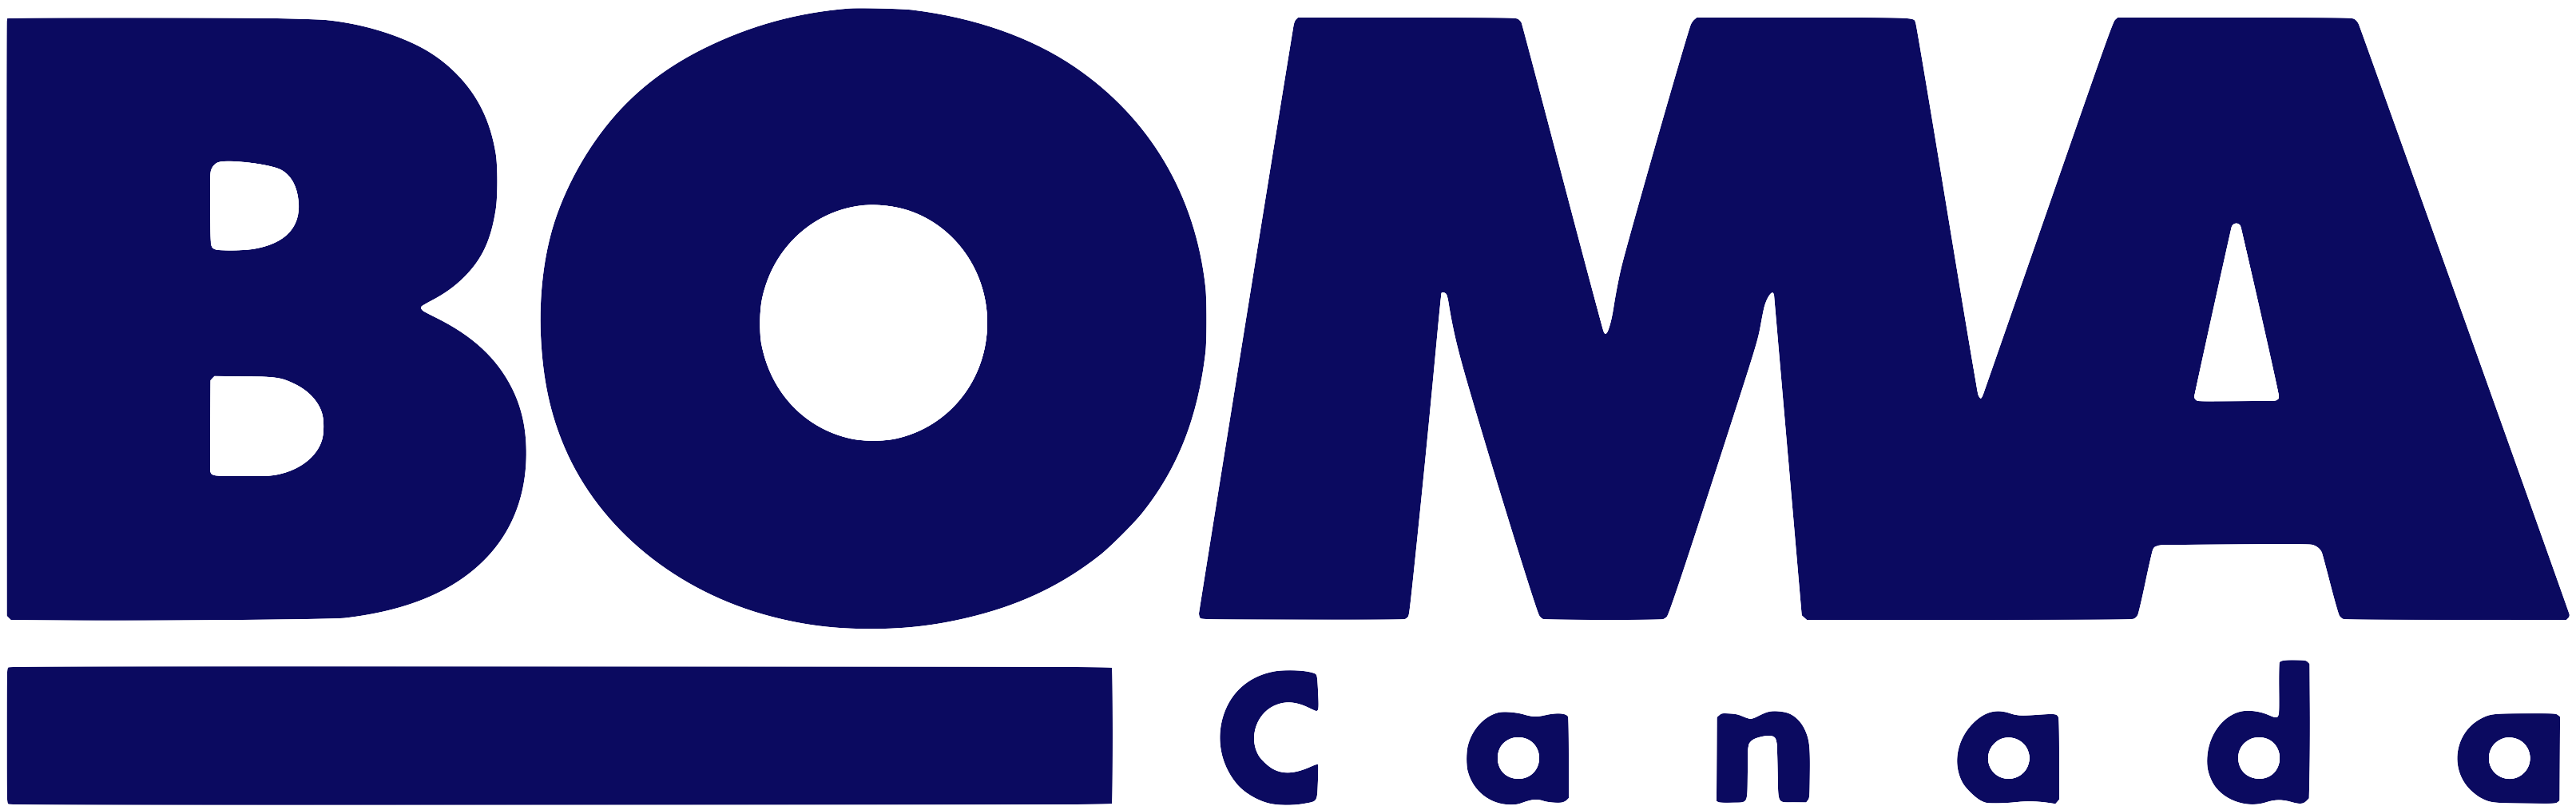 Logo for Building Owners and Managers Association (BOMA) on a transparent background